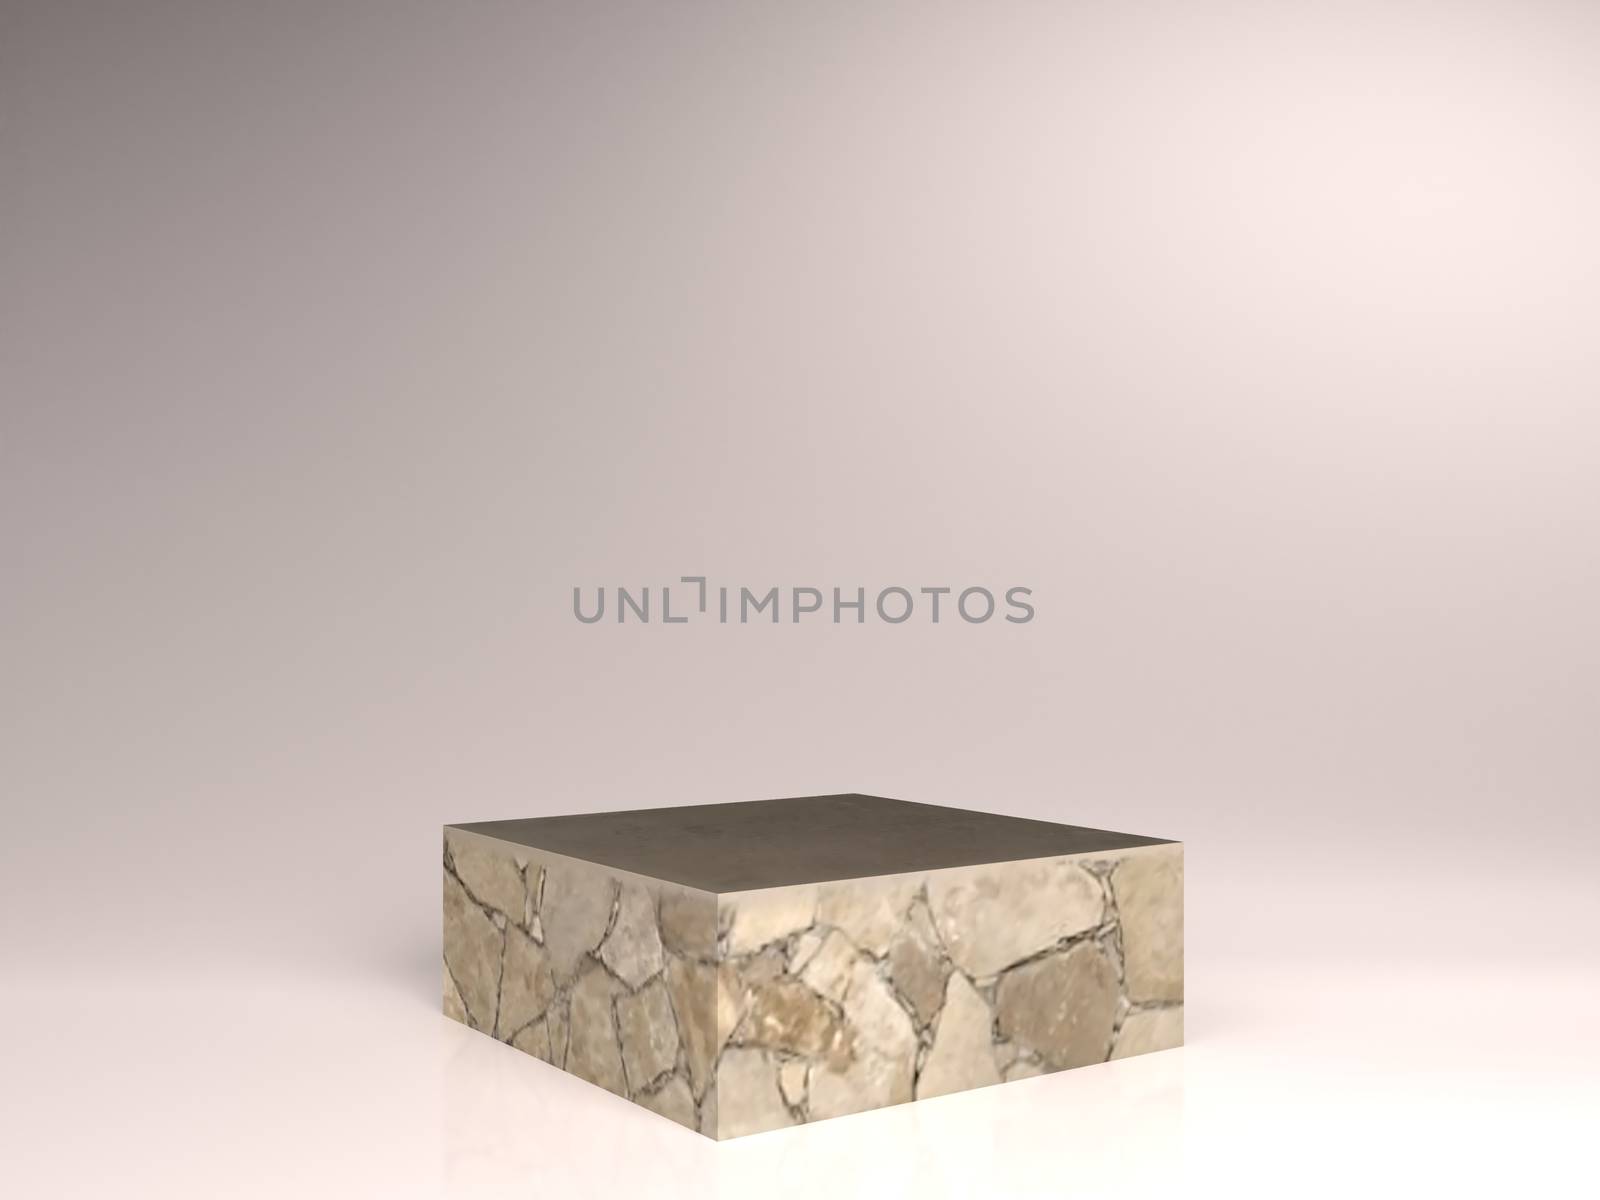 Pedestal Front View minimal podium modern space object clean simple design white 3d render stone light masonry